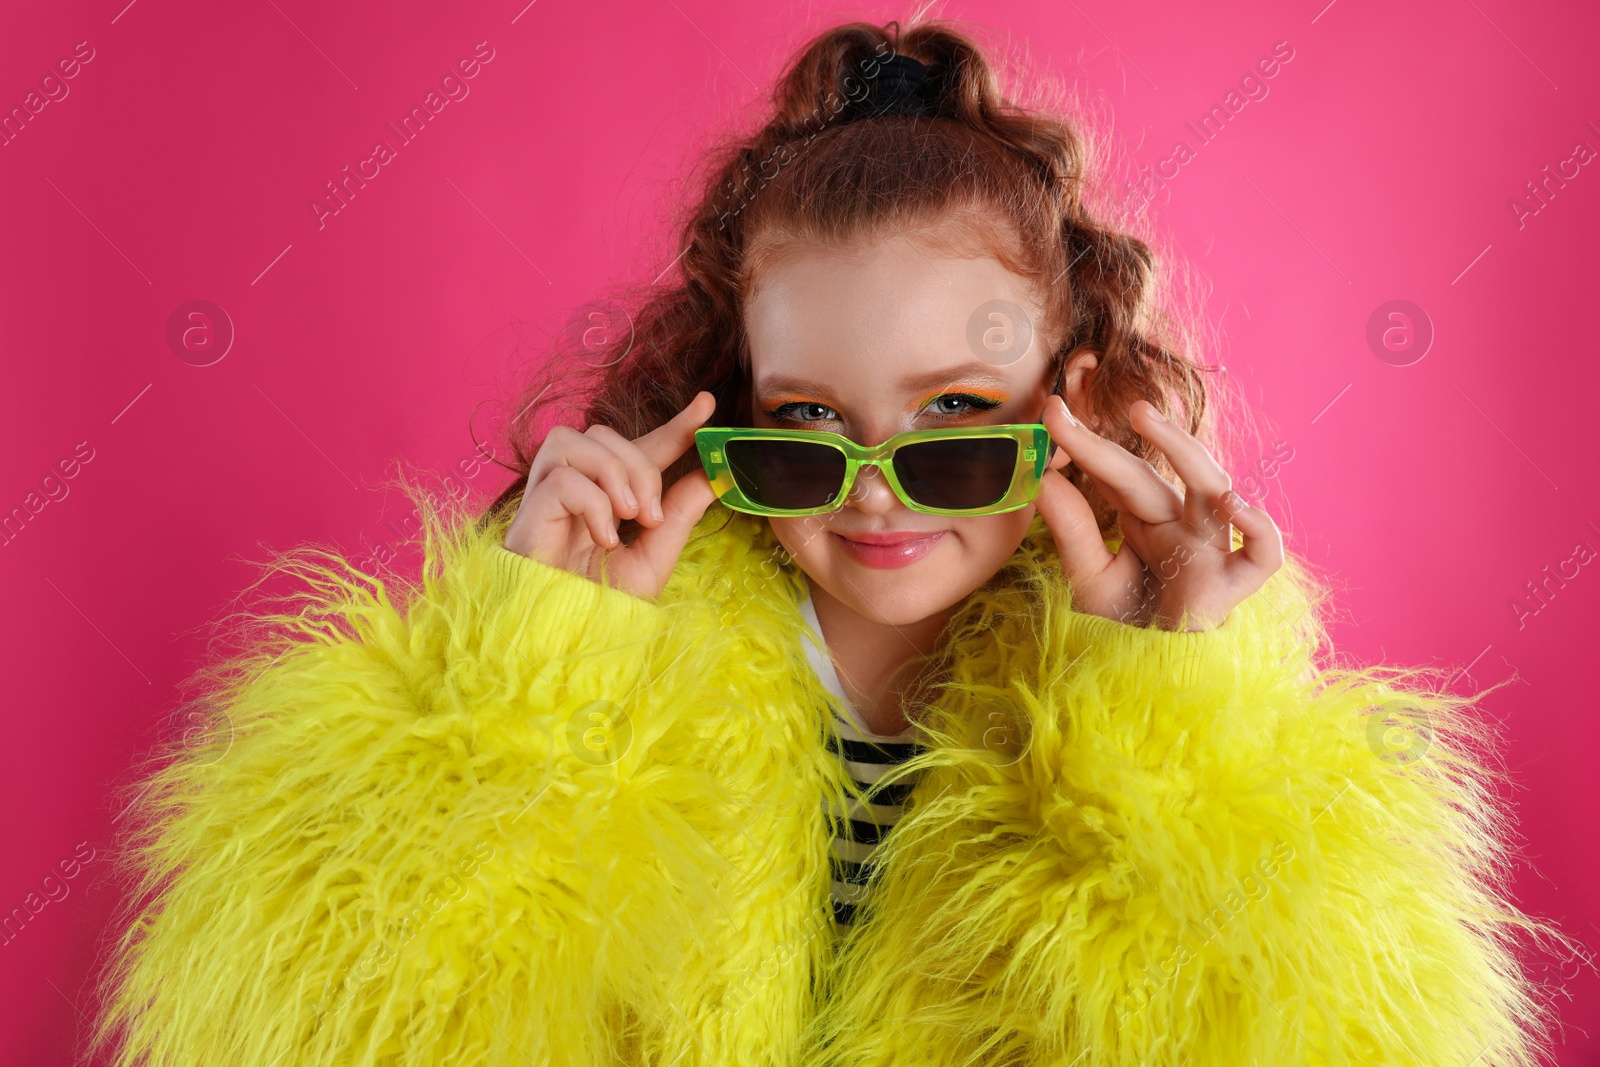 Photo of Cute indie girl with sunglasses on pink background